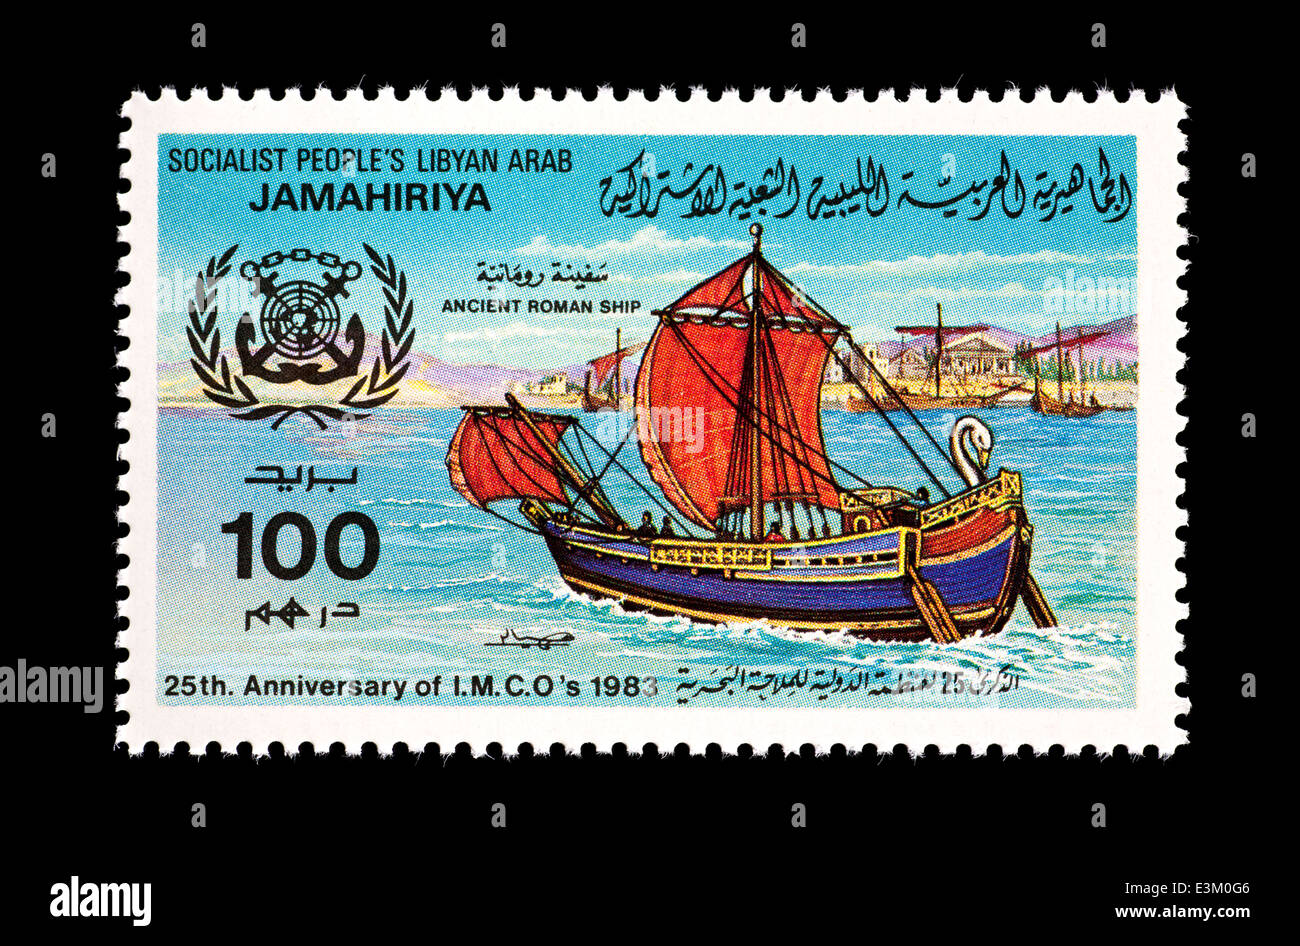 Postage stamp from Libya depicting an ancient Roman sailing ship. Stock Photo